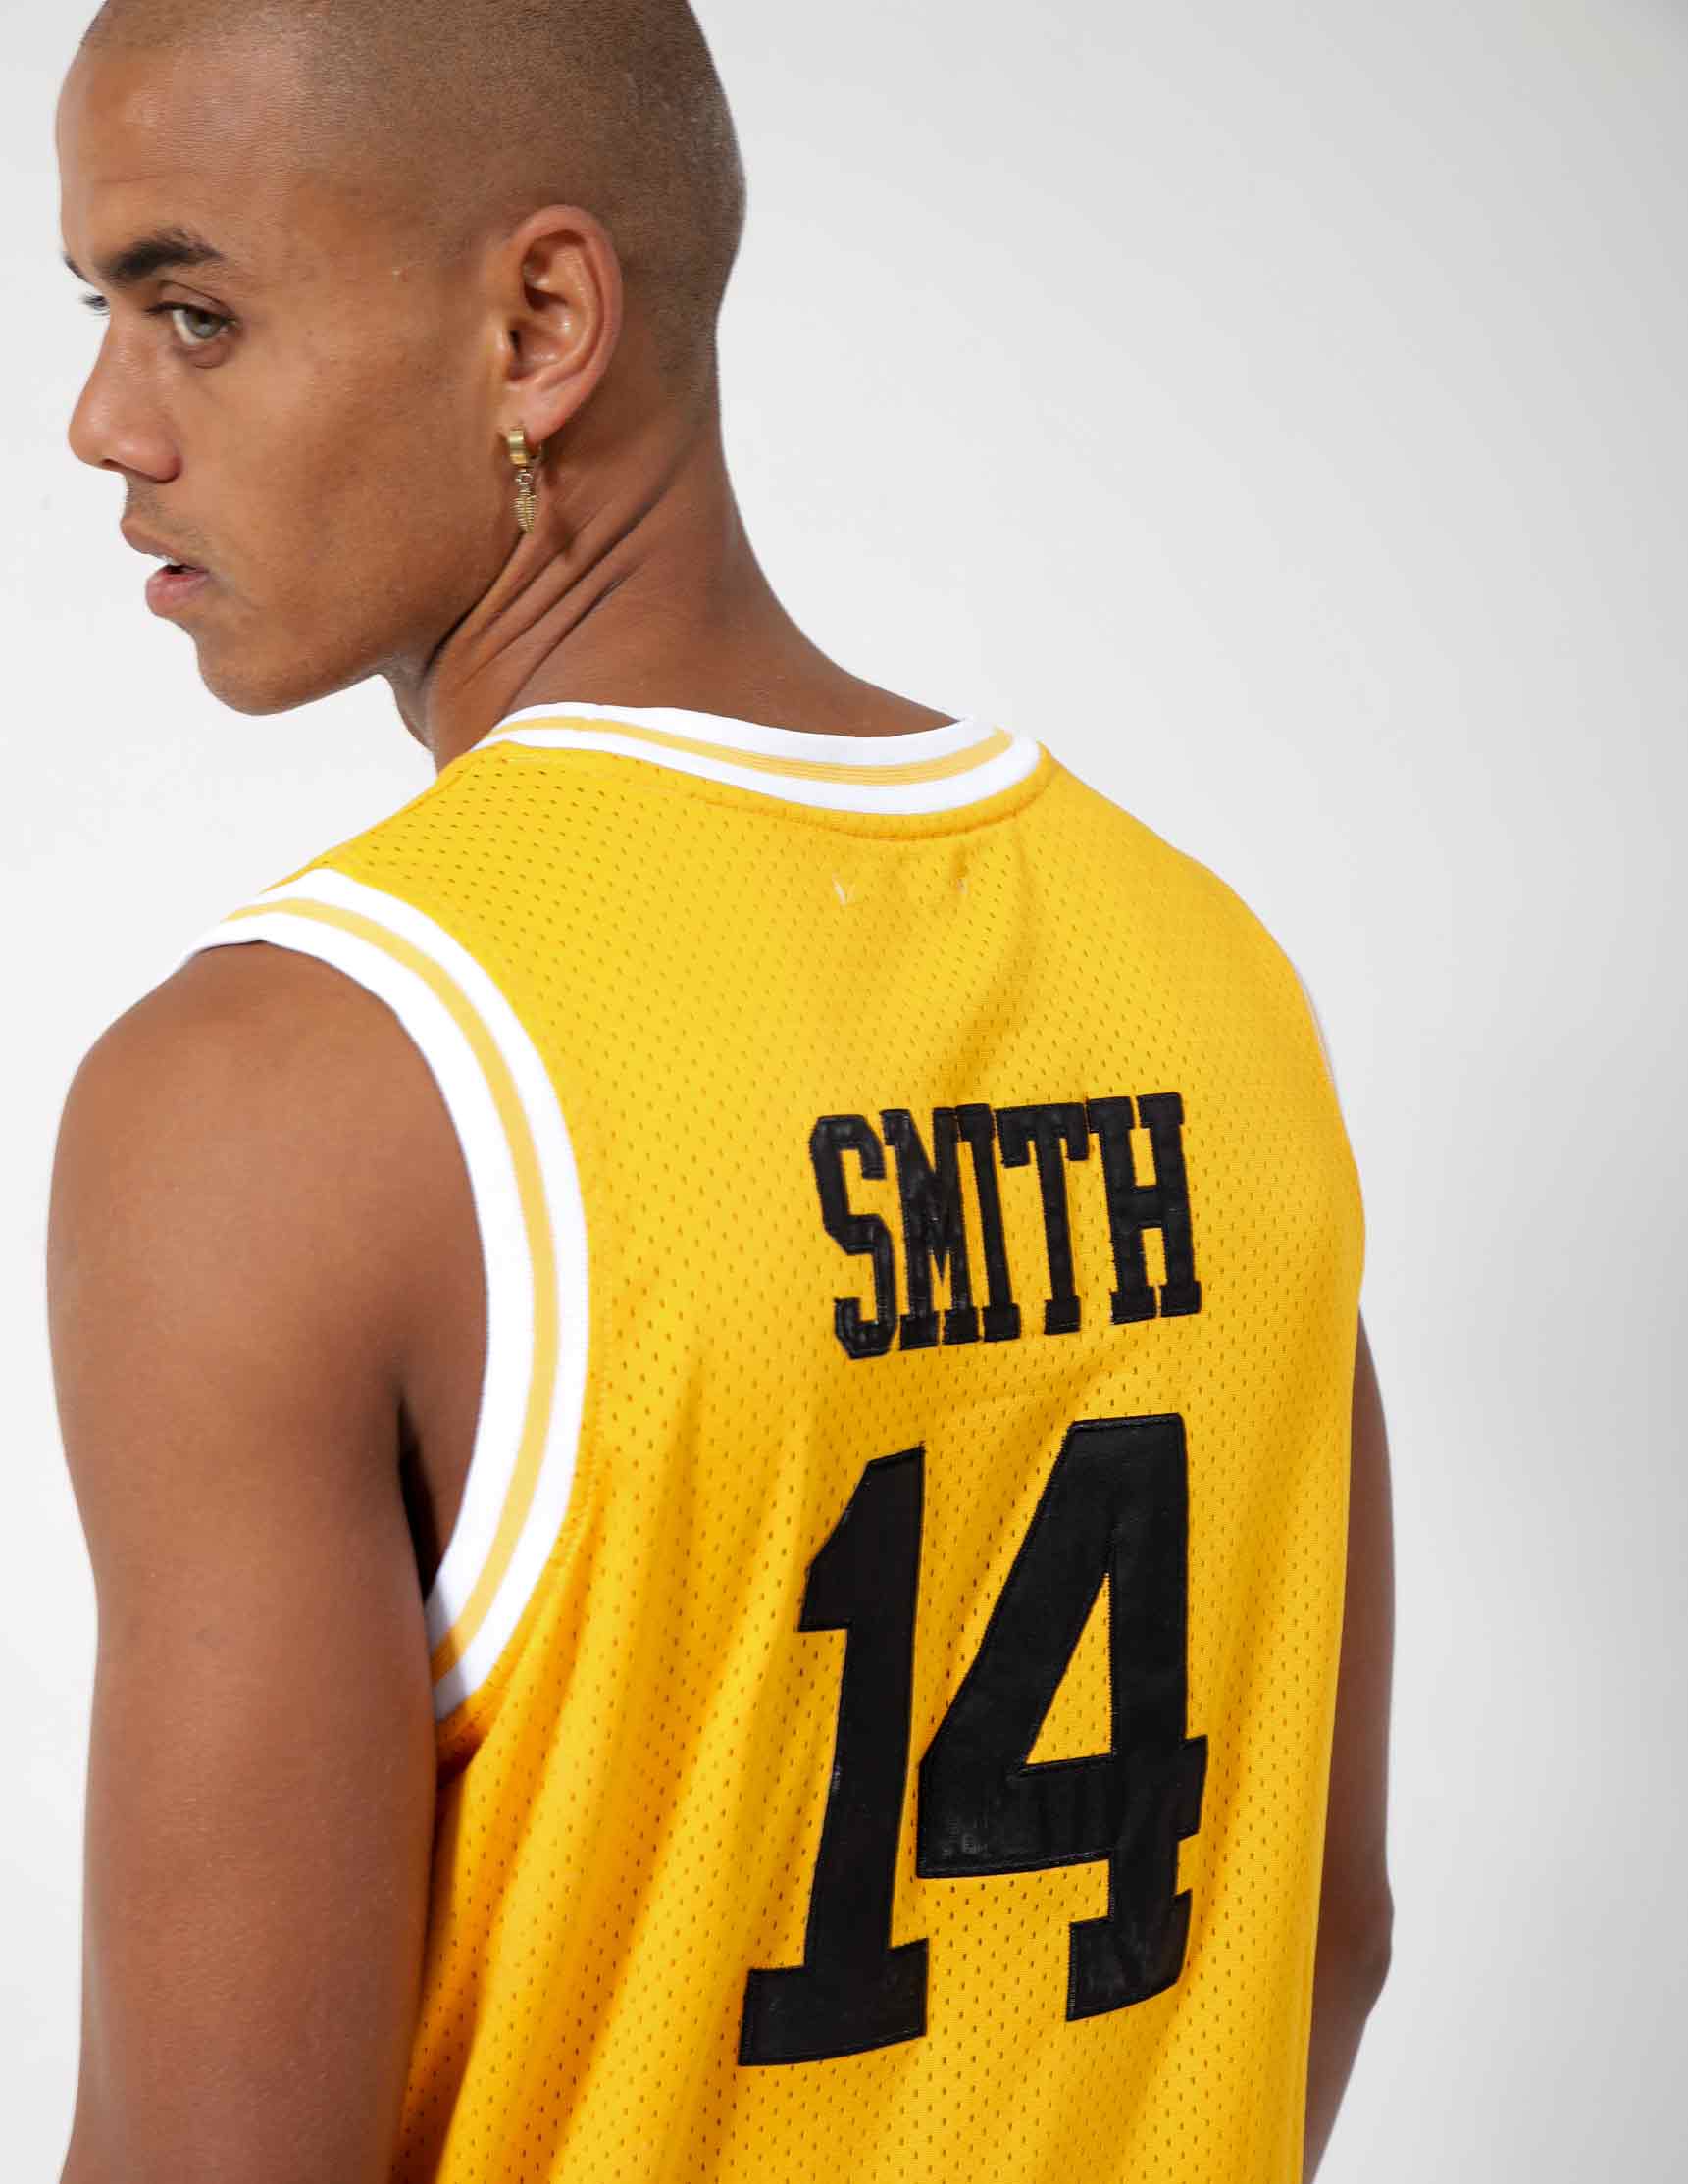 14 Will Smith BEL-AIR Academy Jersey #25 Carlton Banks BEL-AIR